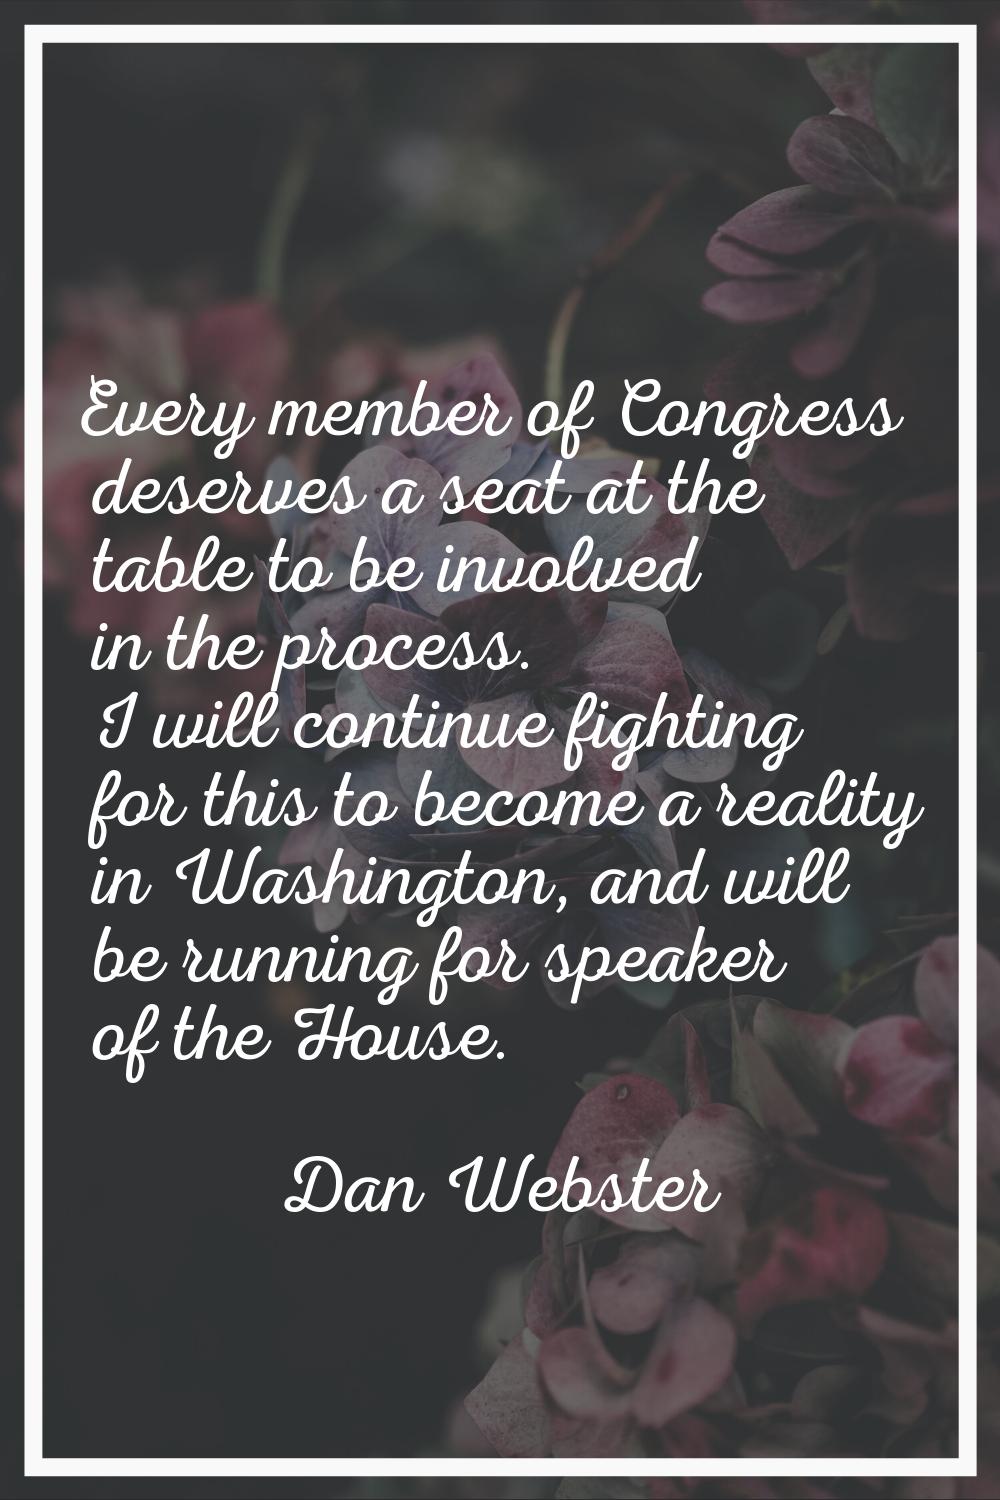 Every member of Congress deserves a seat at the table to be involved in the process. I will continu